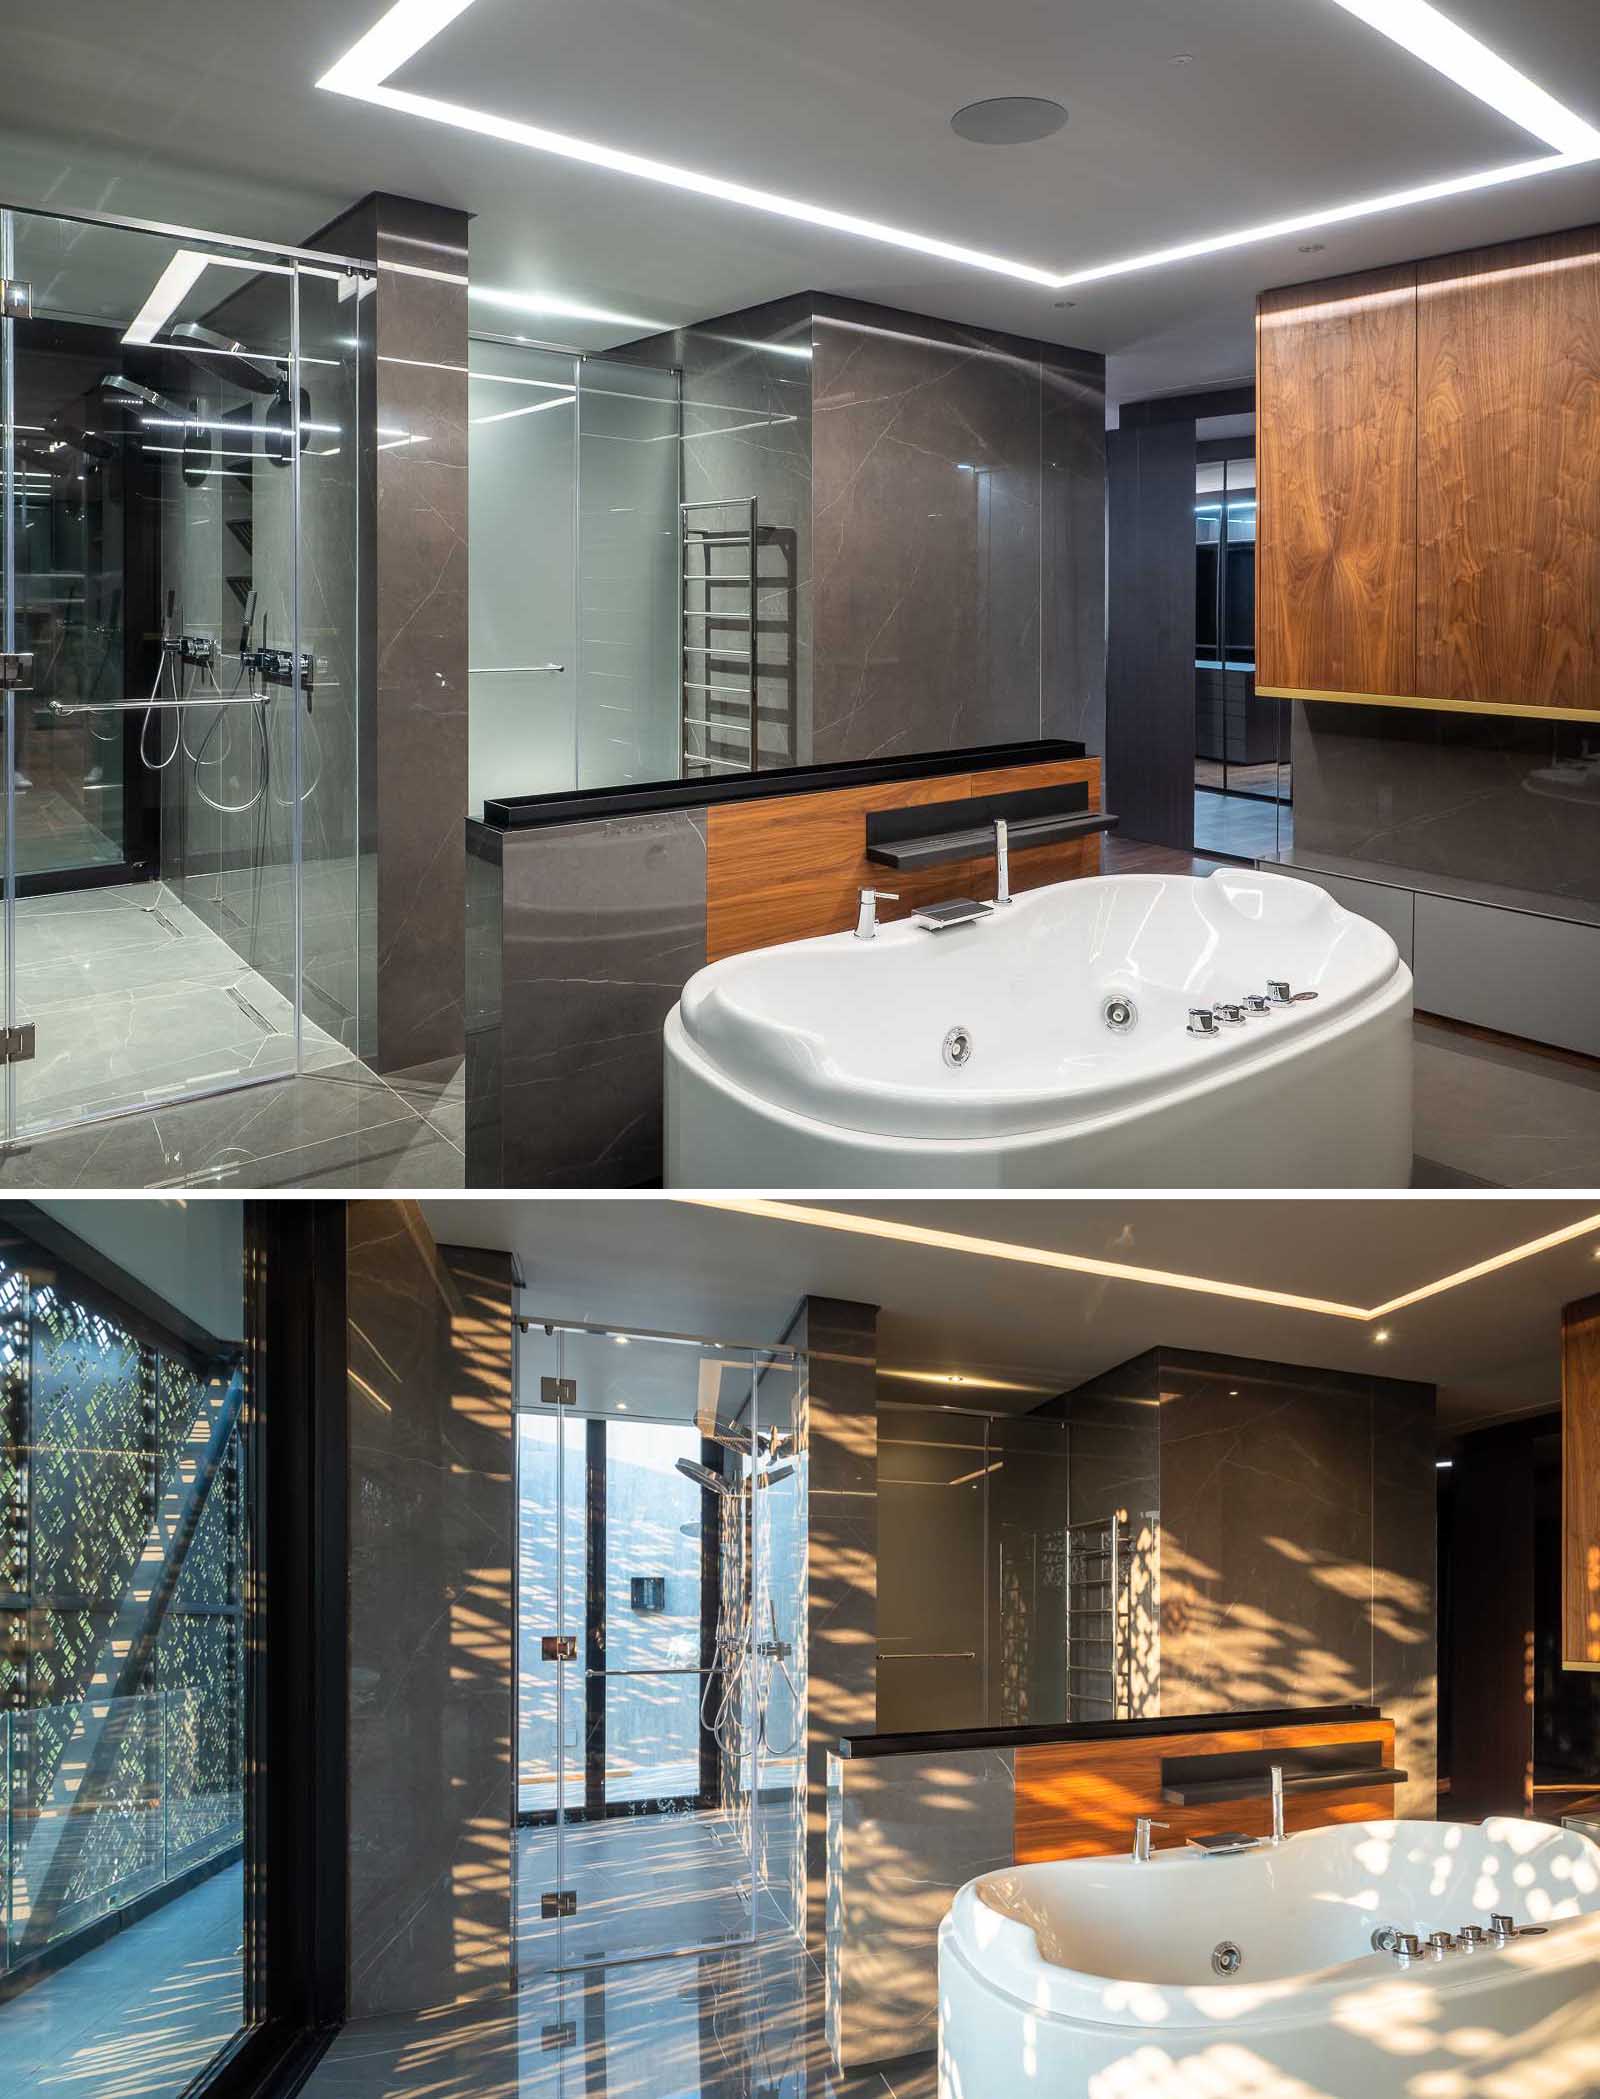 A modern bathroom with lighting embedded into the ceiling.